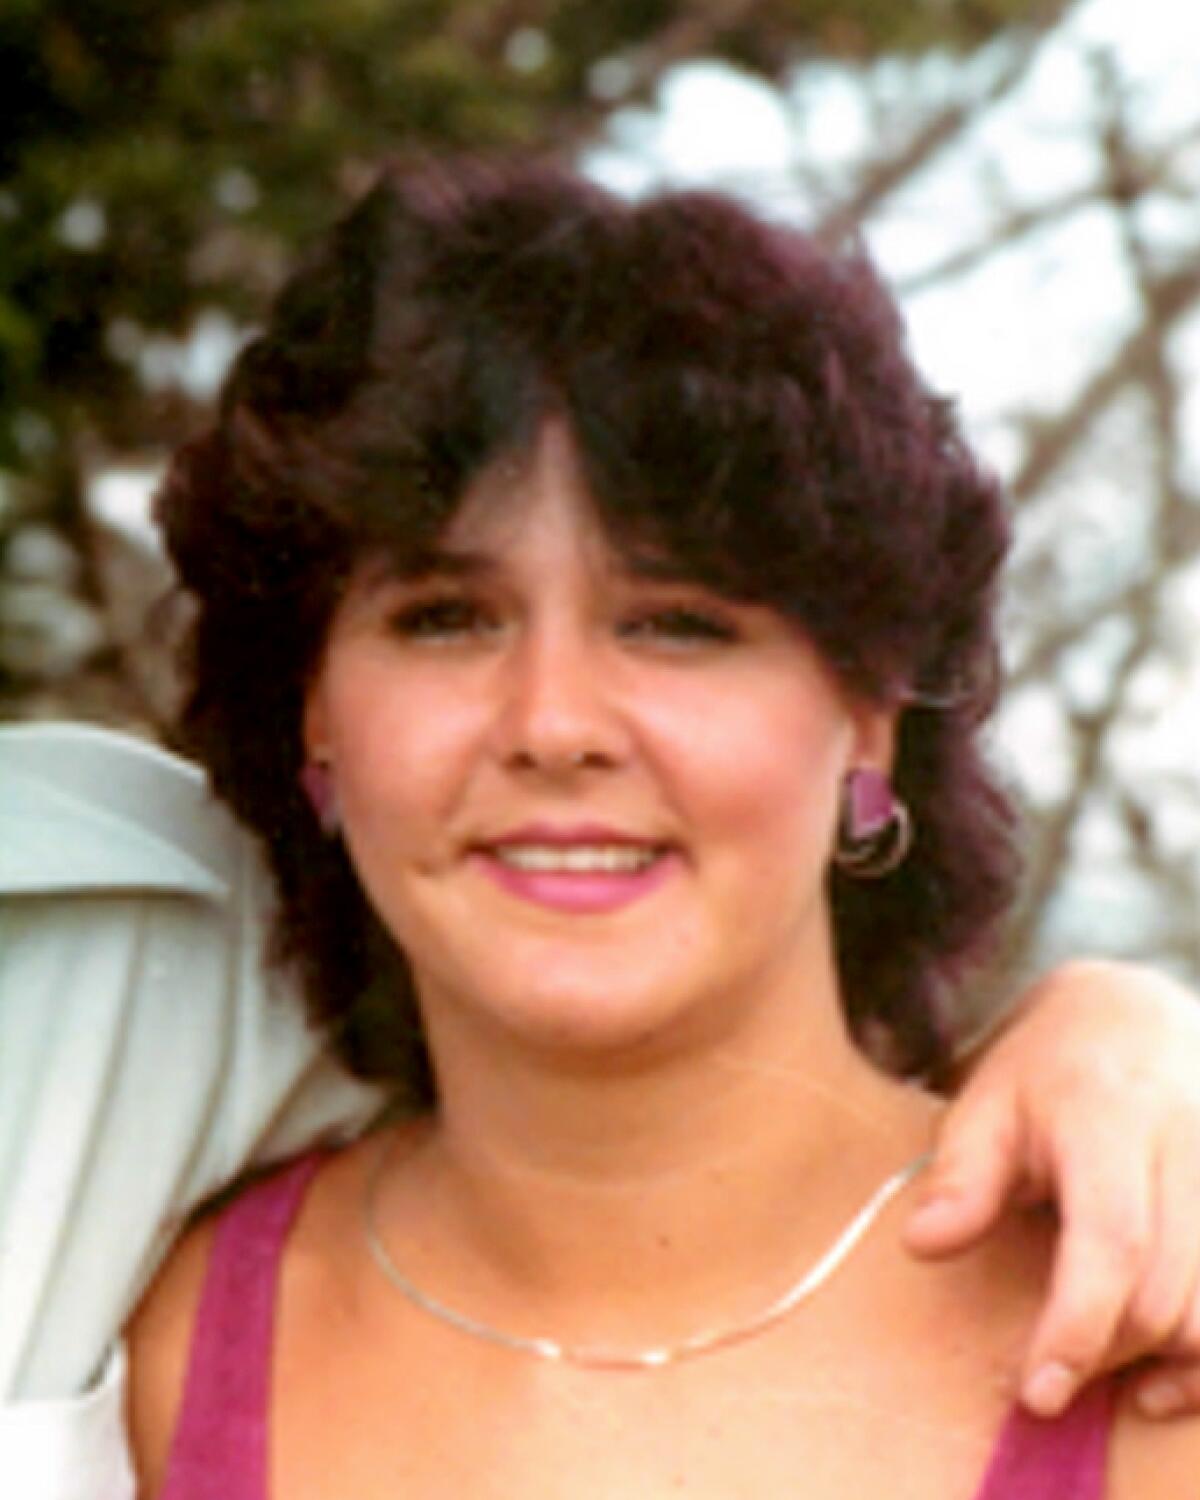 Lisa Gondek, 21, was also found dead after a night out in 1981.